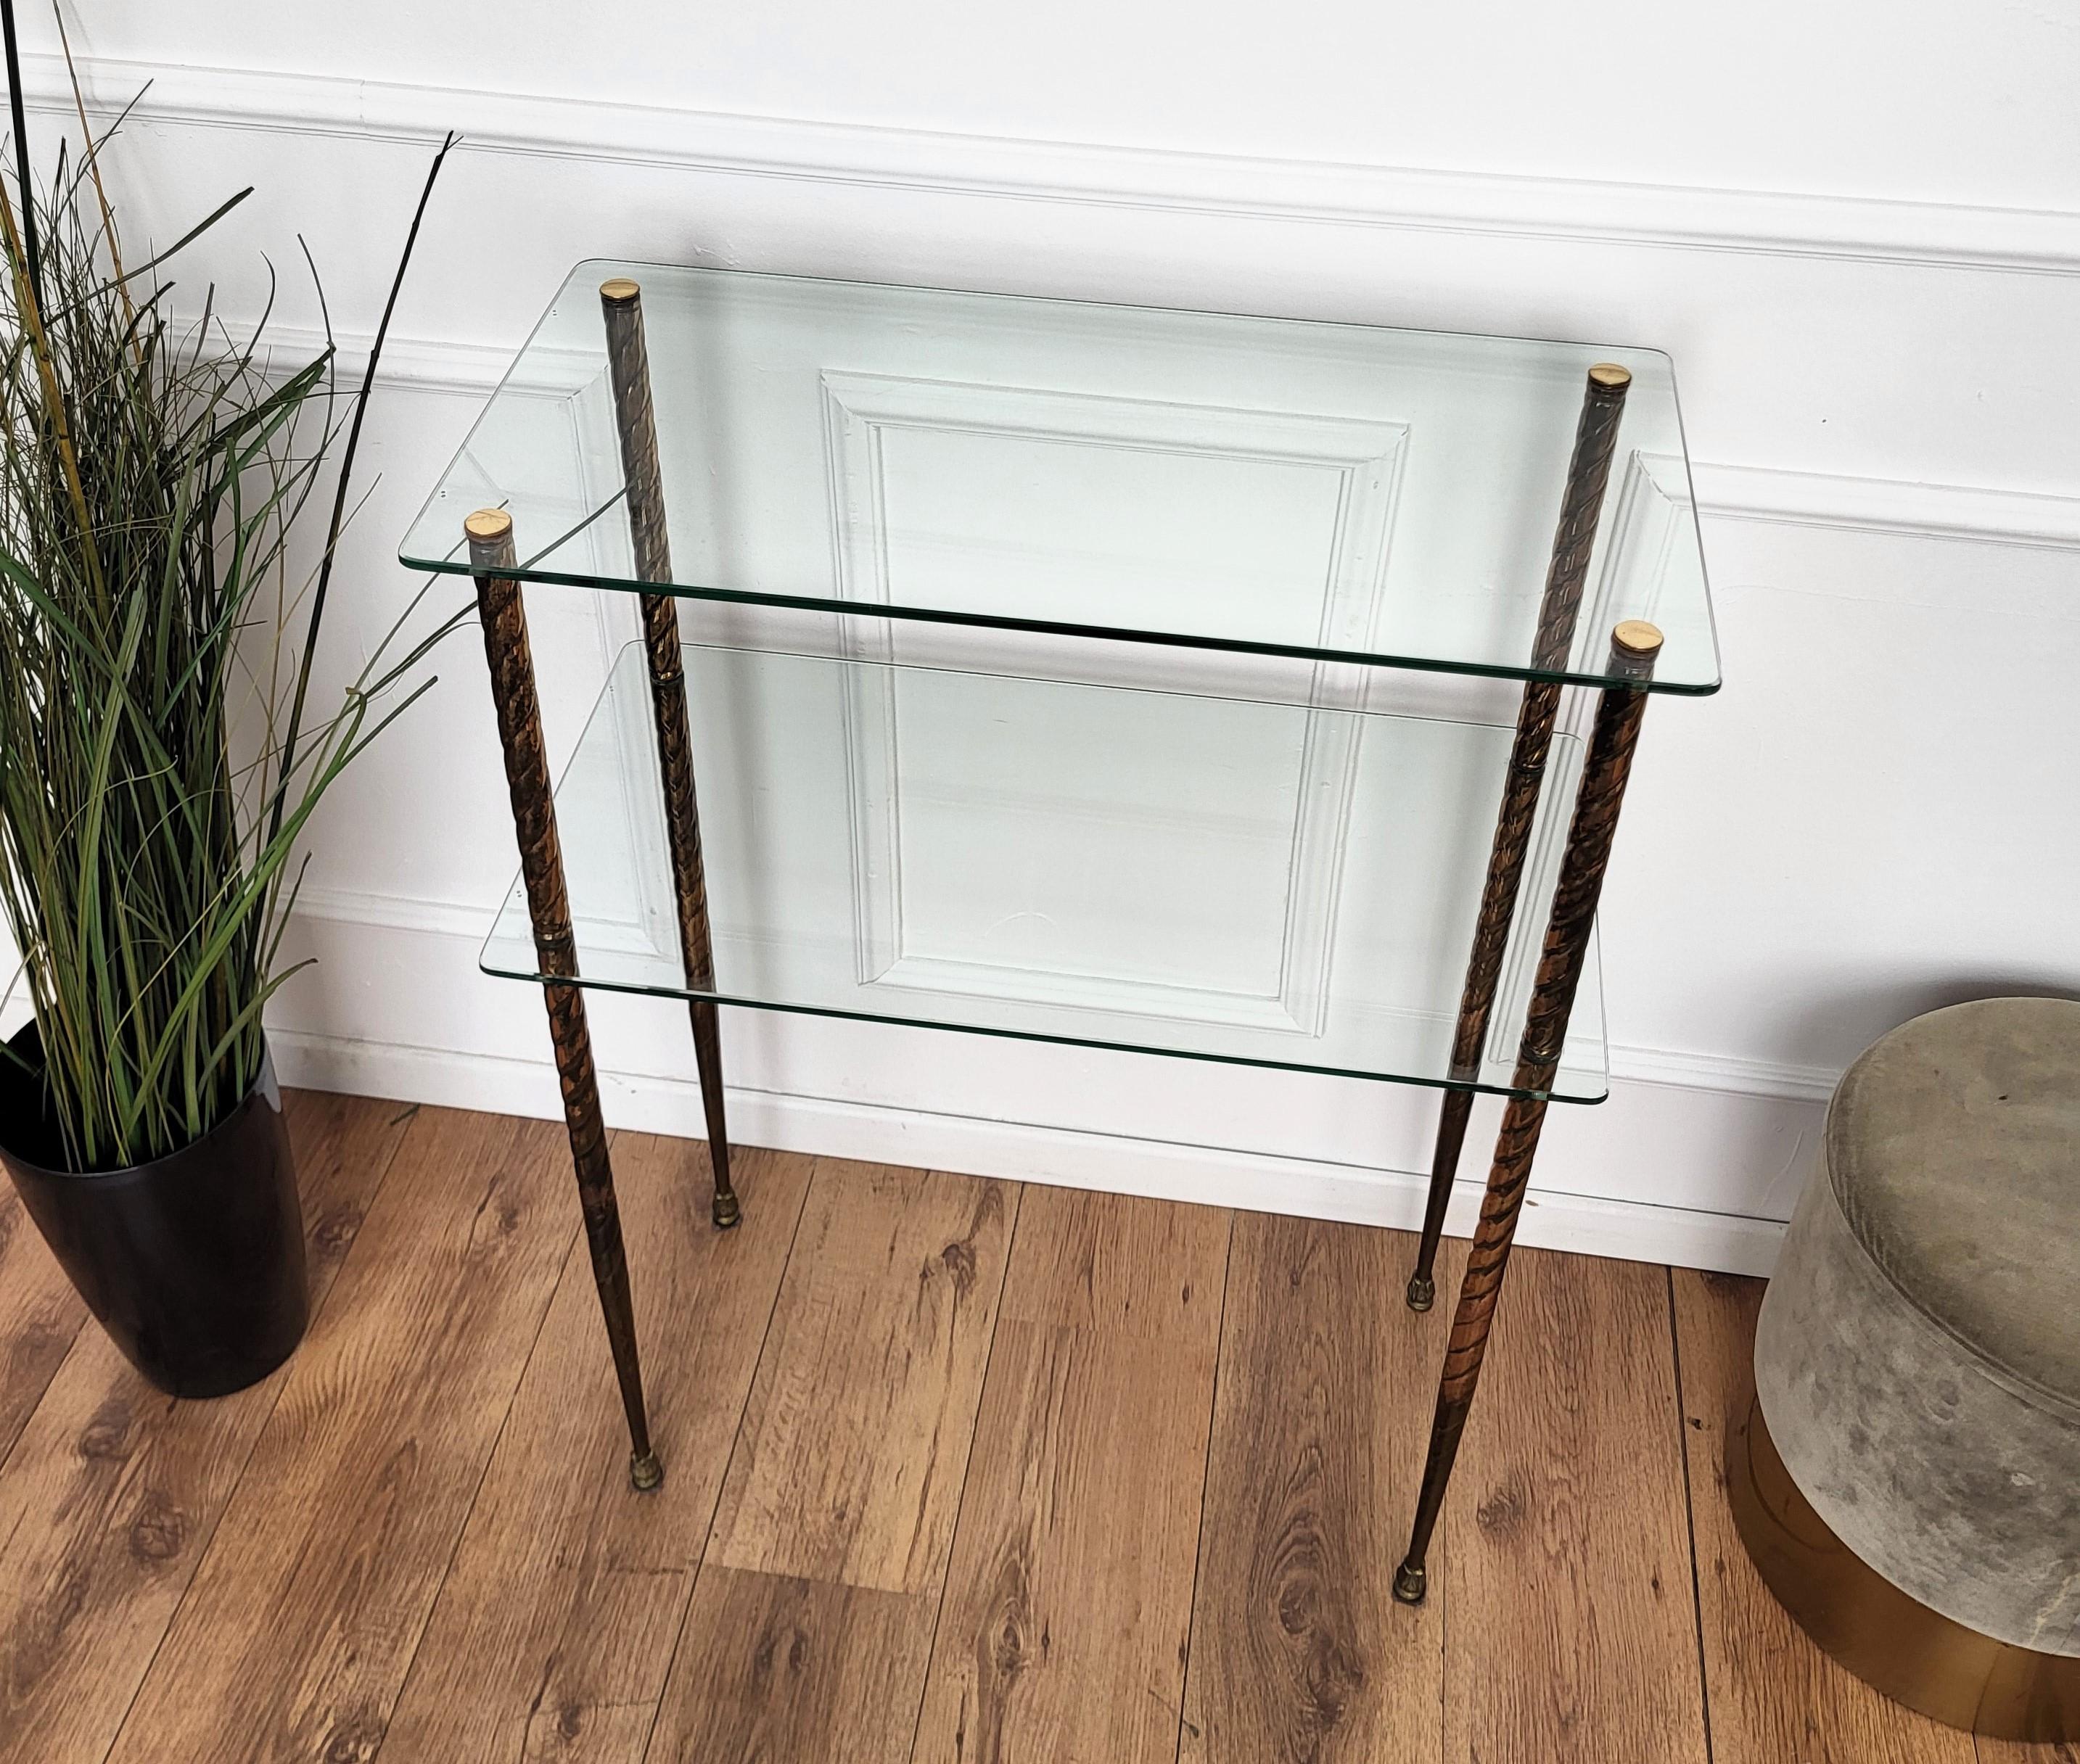 1980s Hollywood Regency Mid-Century Modern Brass Glass Etagere Console Table For Sale 2